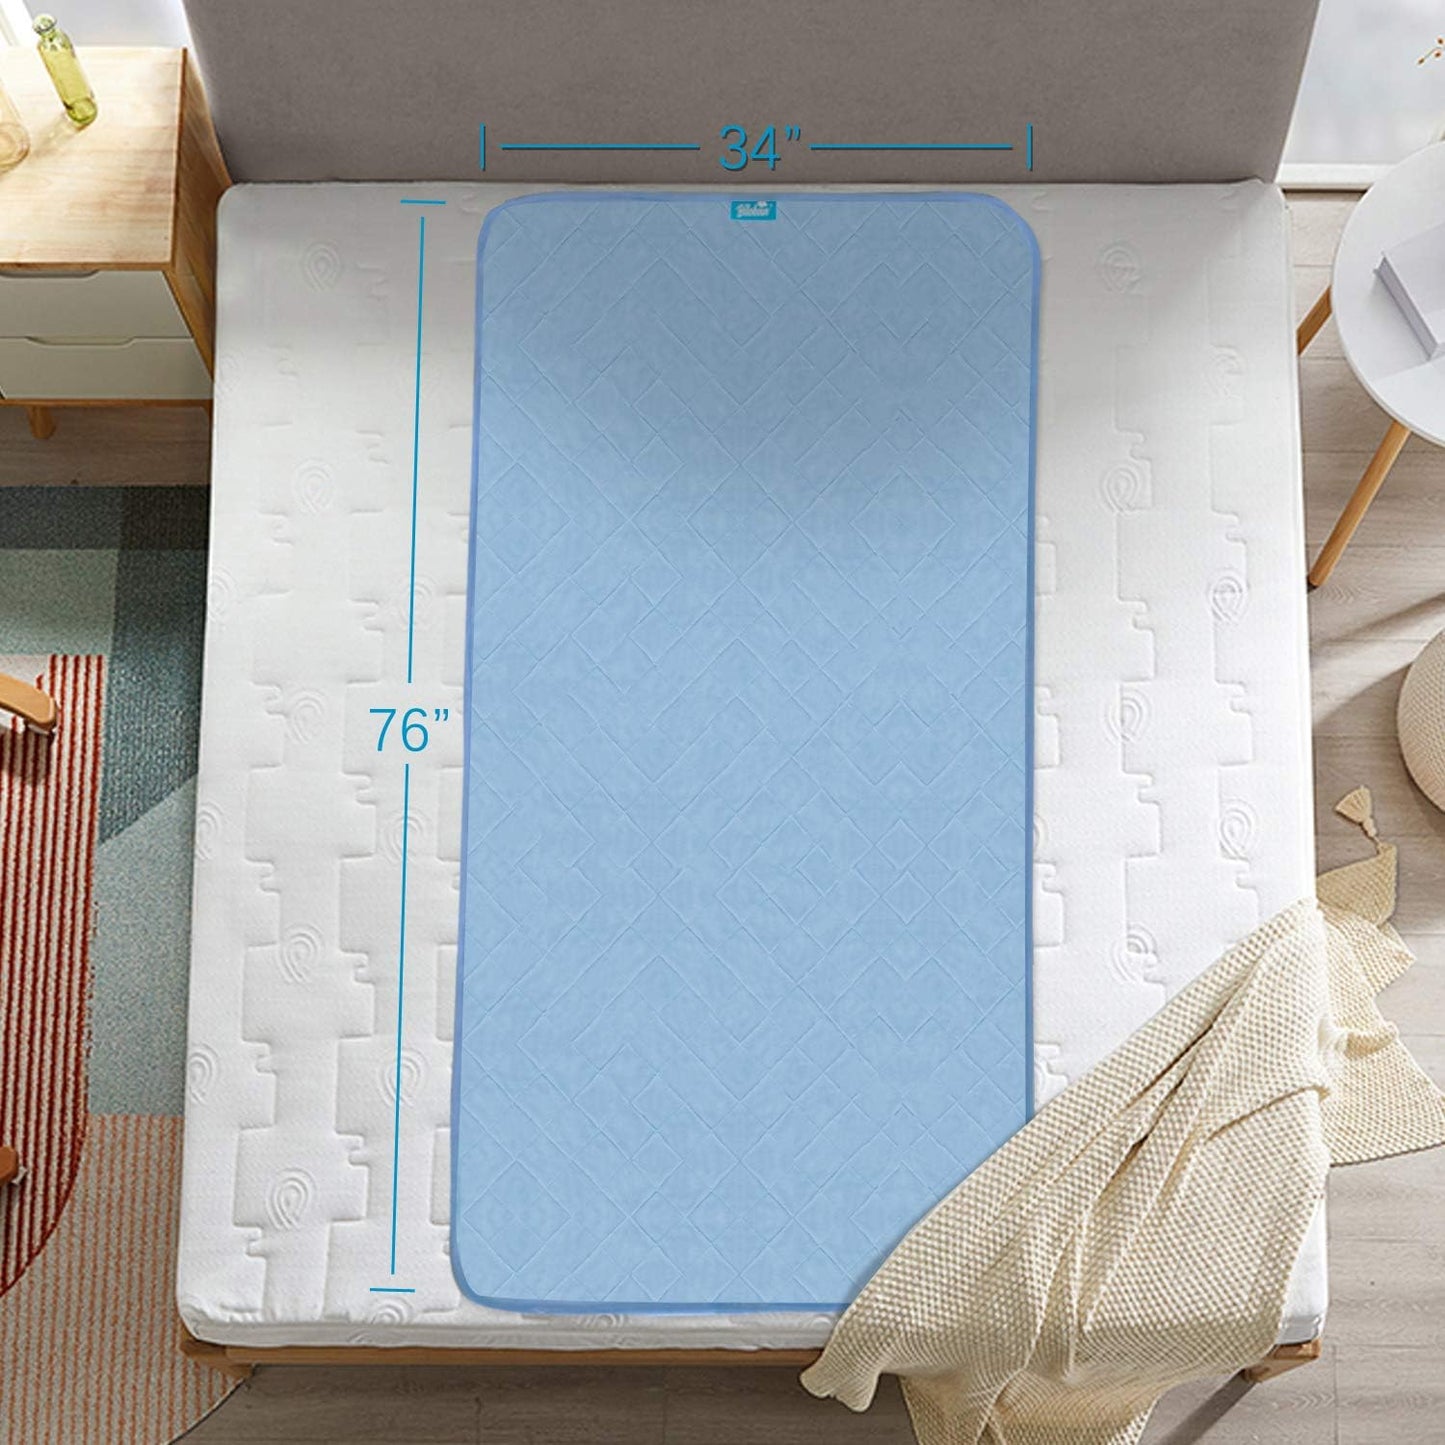 Waterproof Hospital Pad/ Mat - 34" x 76", Reusable Chuck Pads, Incontinence Underpads, Sheet Protector with Non-slip Back for Adults, Elderly, Kids and Pets, Machine Washable, Blue